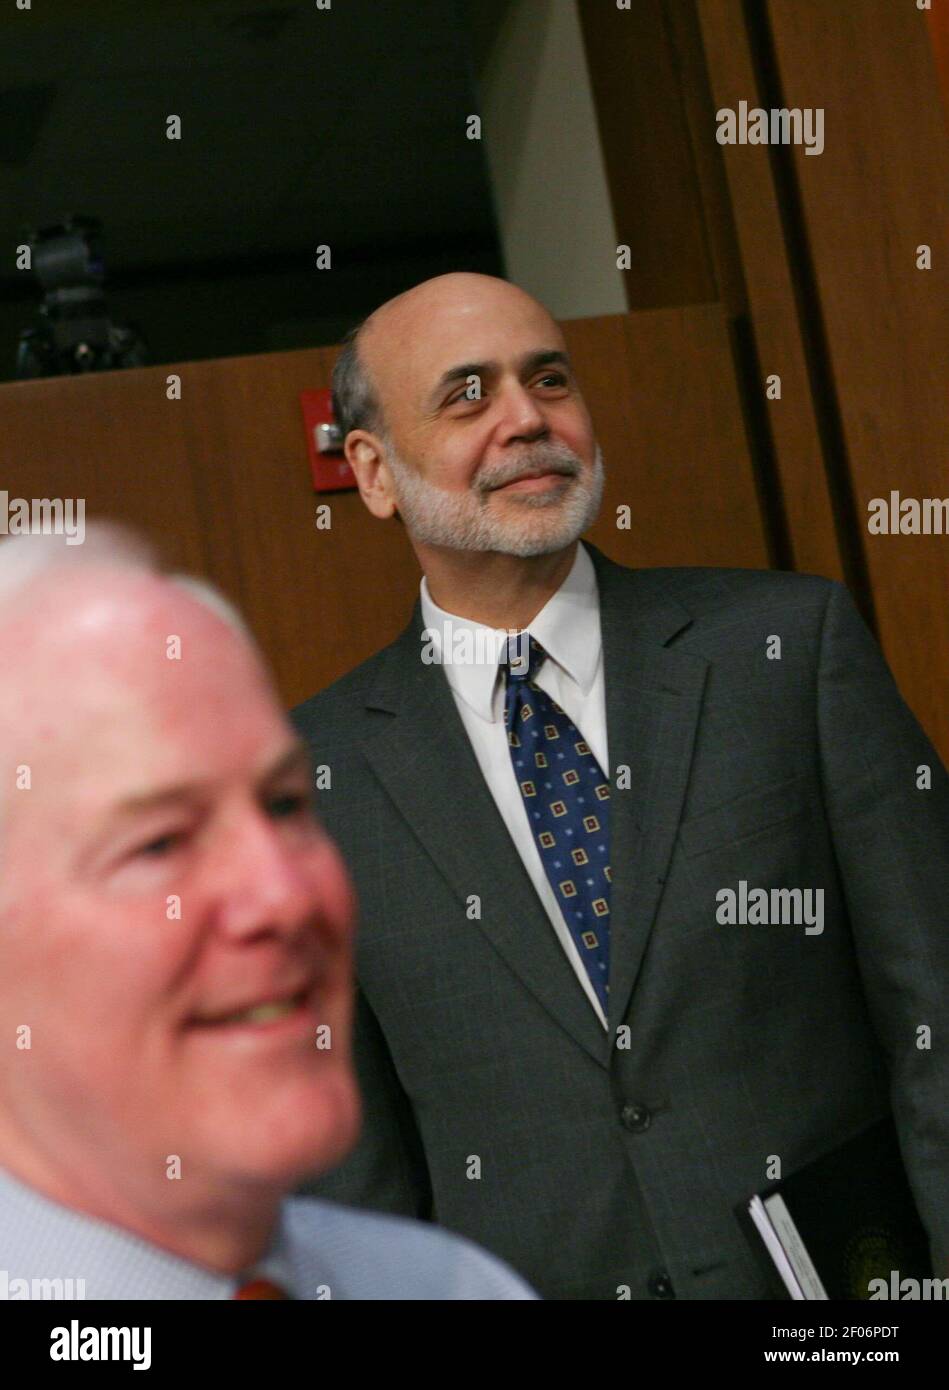 07 January 2011 - Washington, DC - Federal Reserve Chairman Ben Bernanke spoke before the Senate Budget Committee to discuss the economy of the United States and a possible economic recovery ahead. Photo Credit: Gary Fabiano/Sipa Press/Bernanke01072011.020/1101071854 Stock Photo